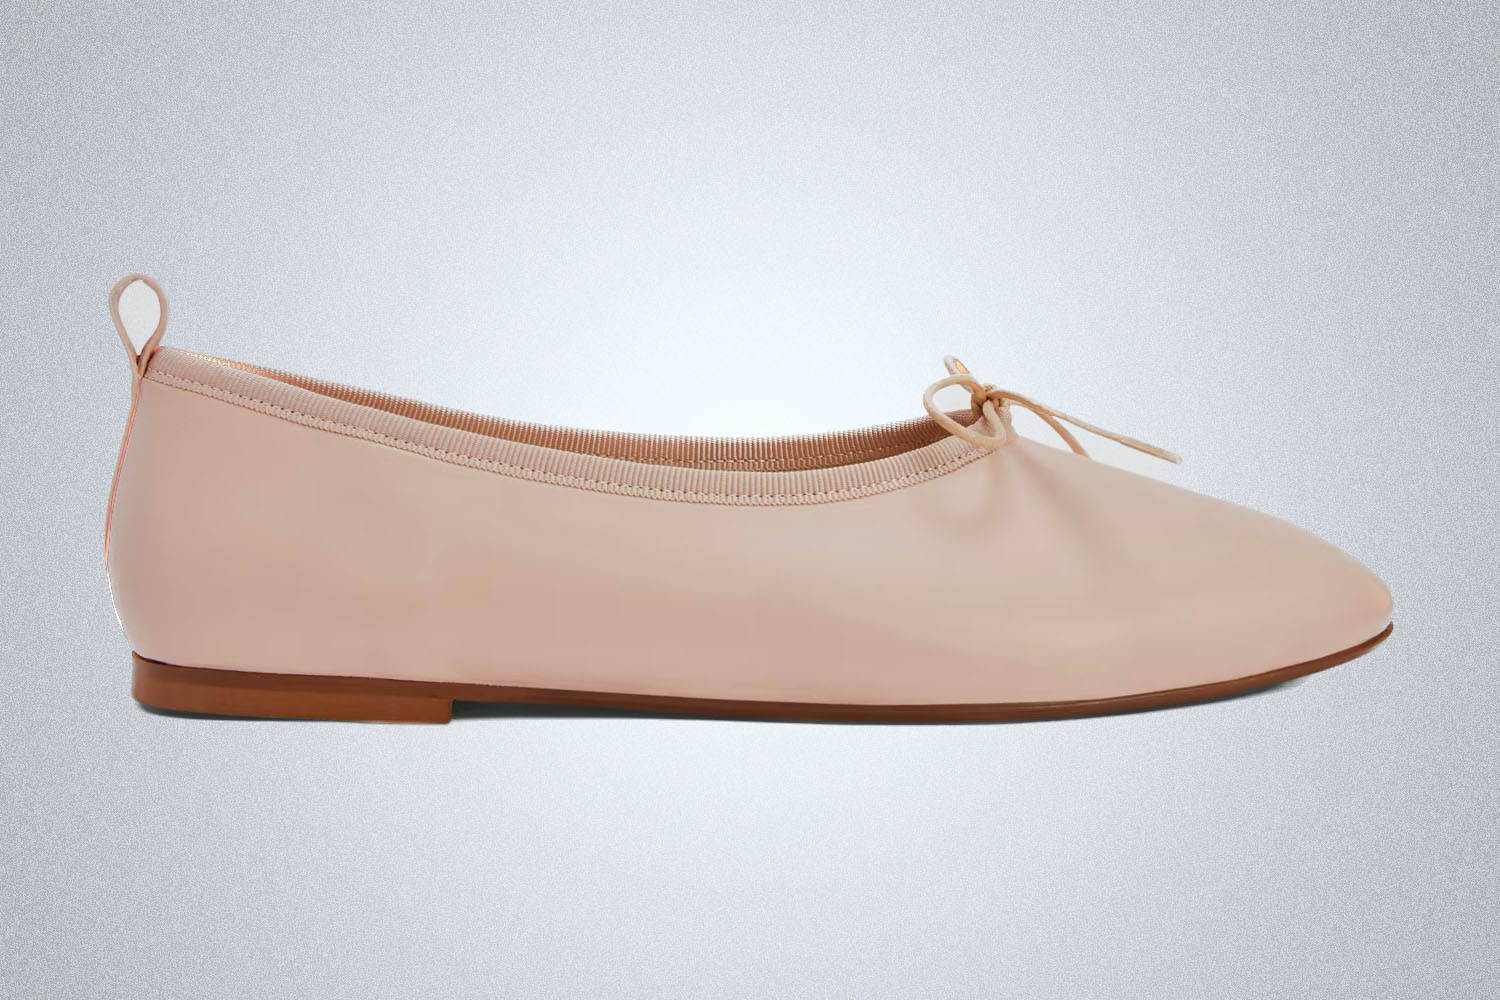 Everlane The Day Ballet Flat